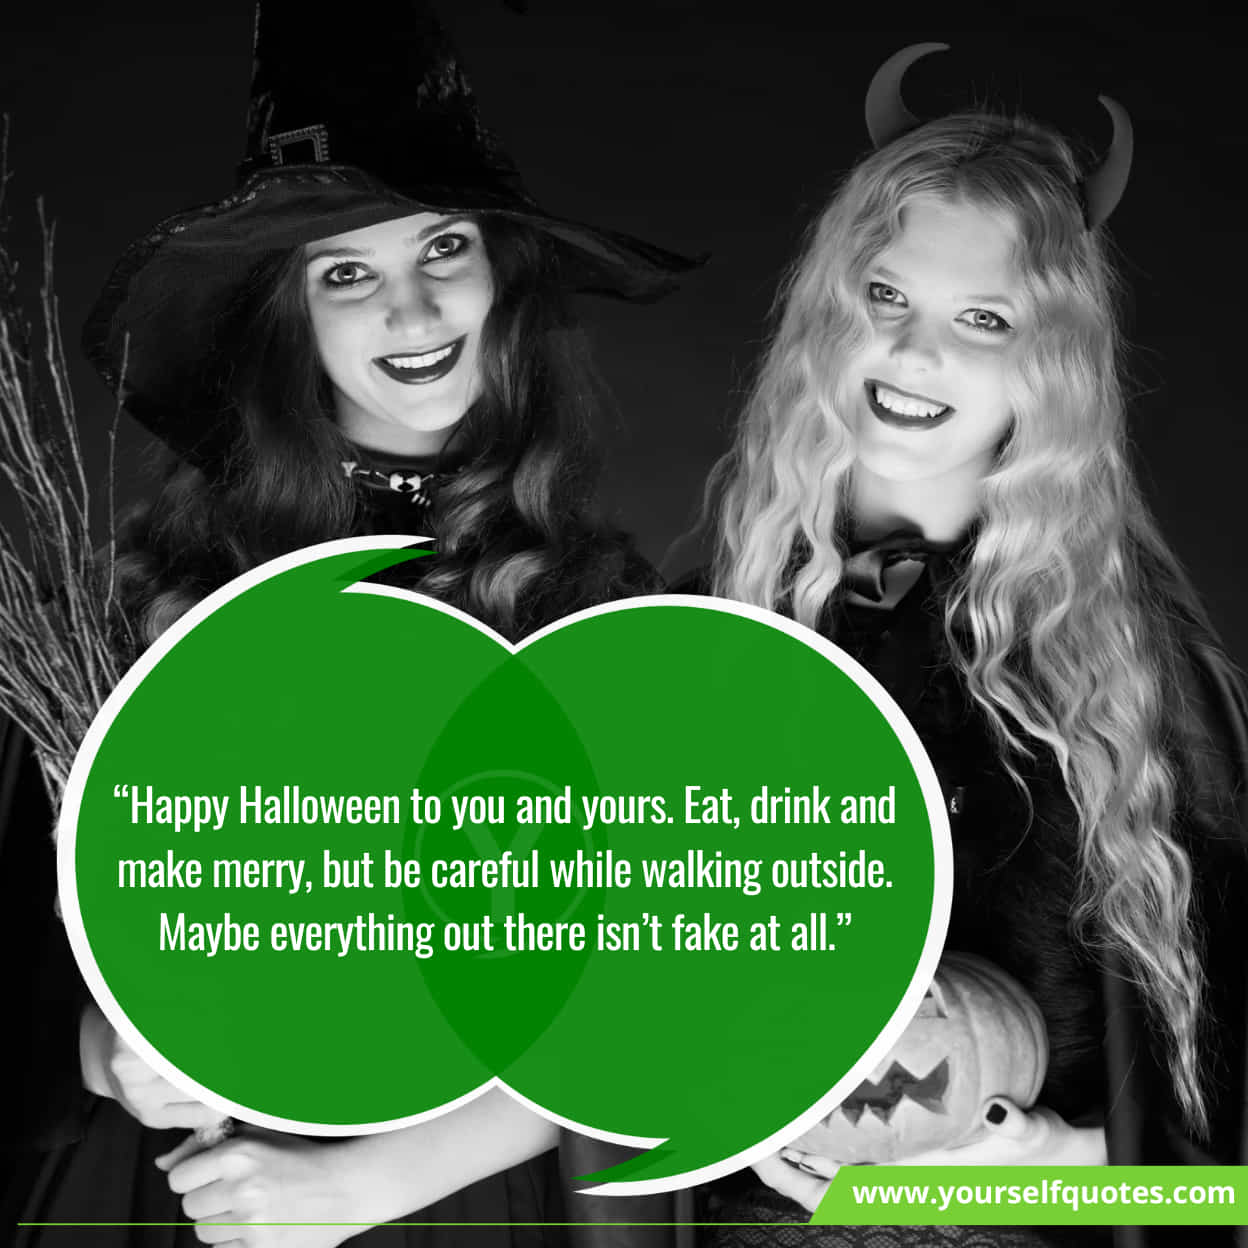 Funny Halloween Wishes About Best Friends